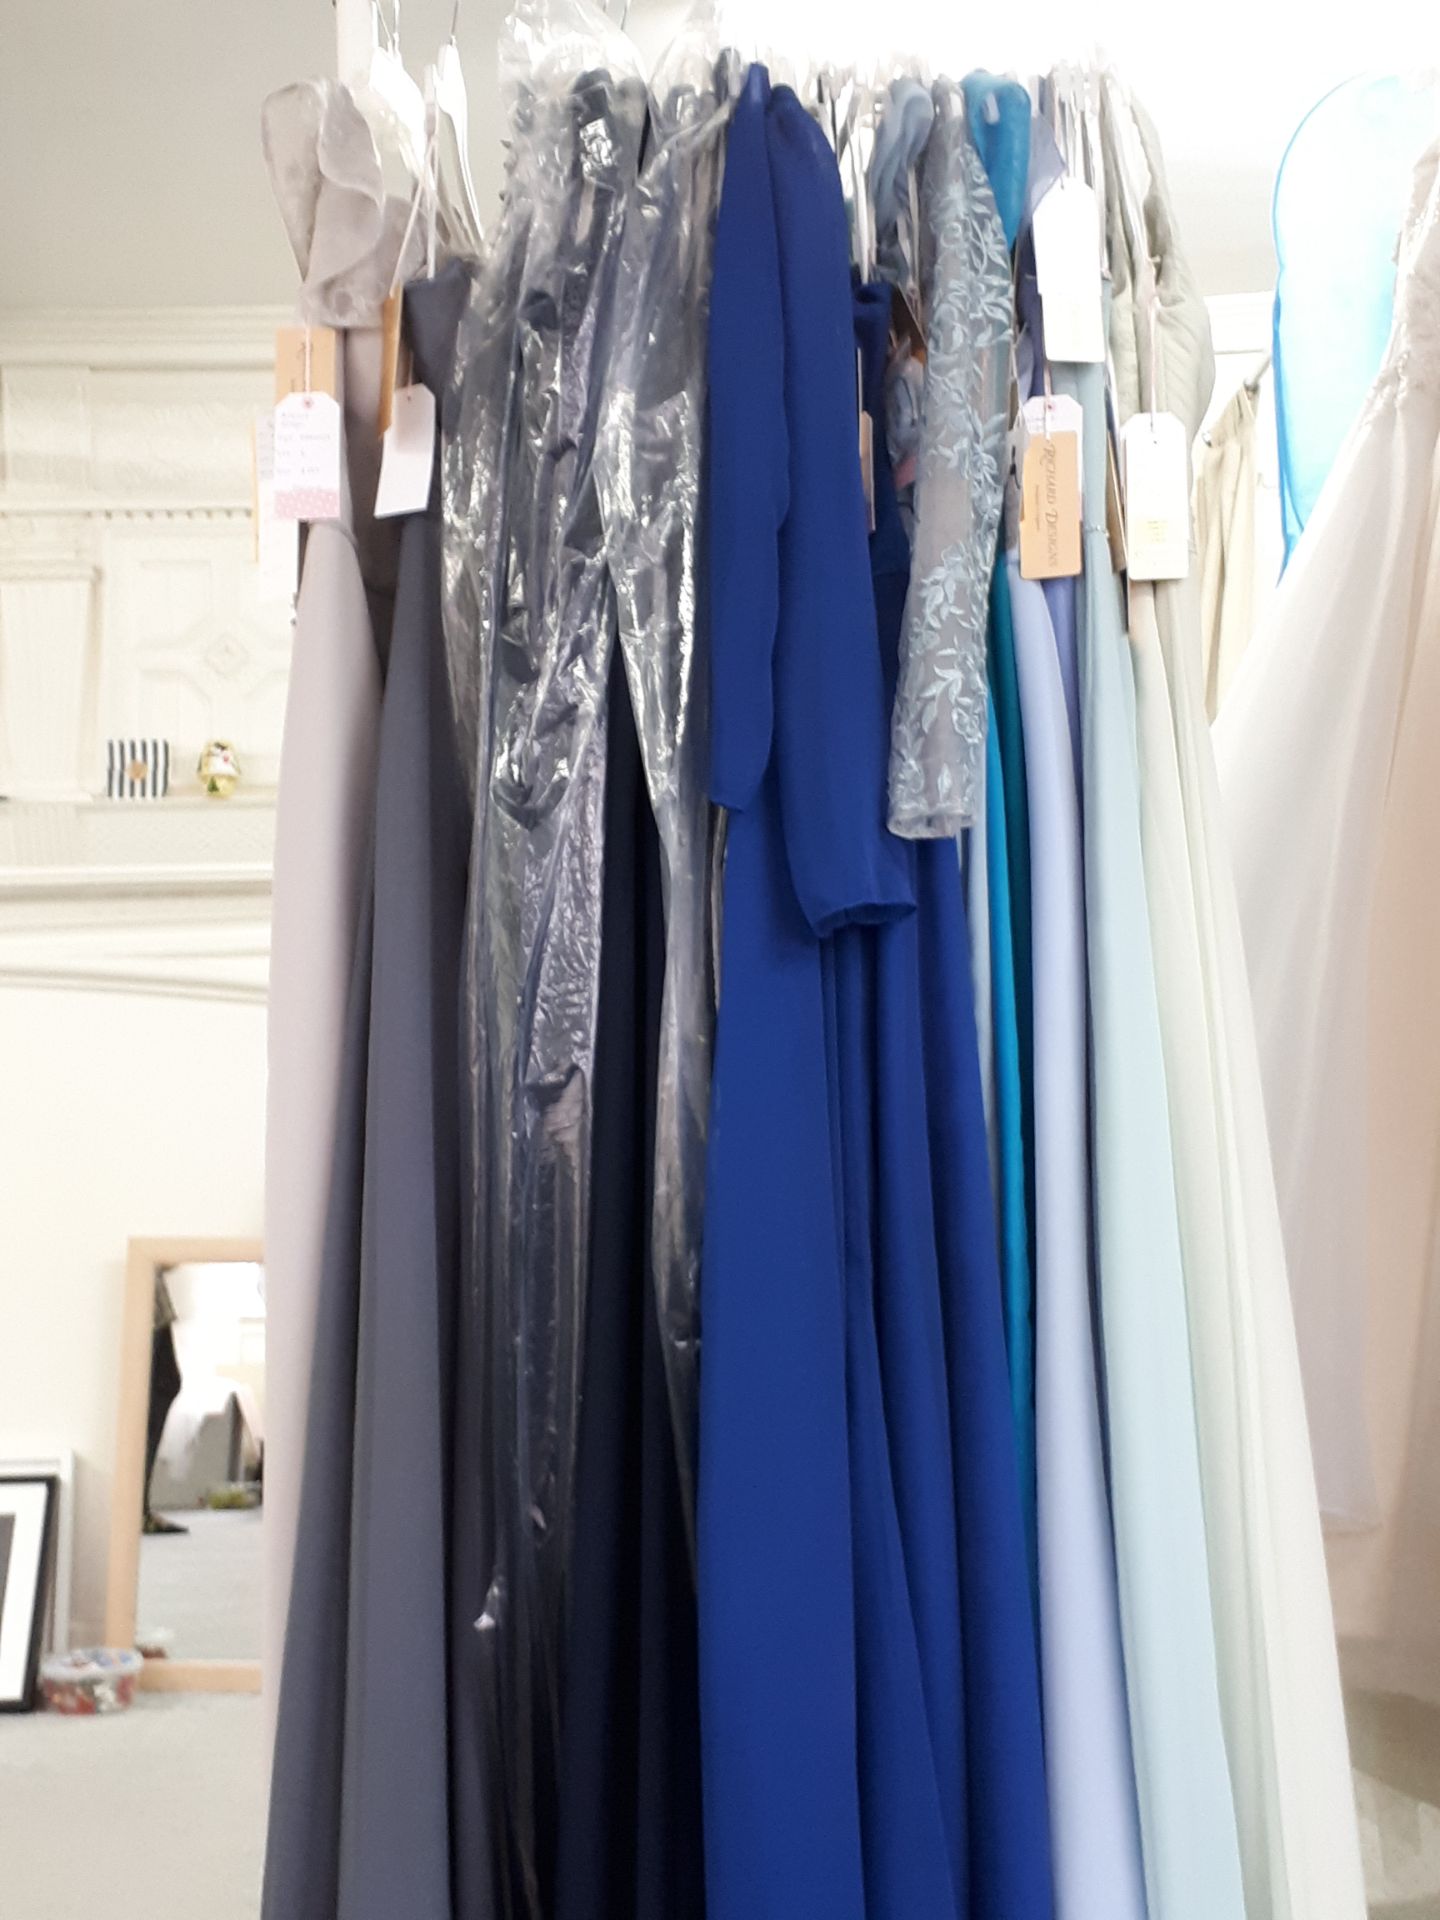 Bulk Lot of Dresses Mixed Sizes and Colours. All From Alfred Angelo x 50 Dresses - Image 2 of 9